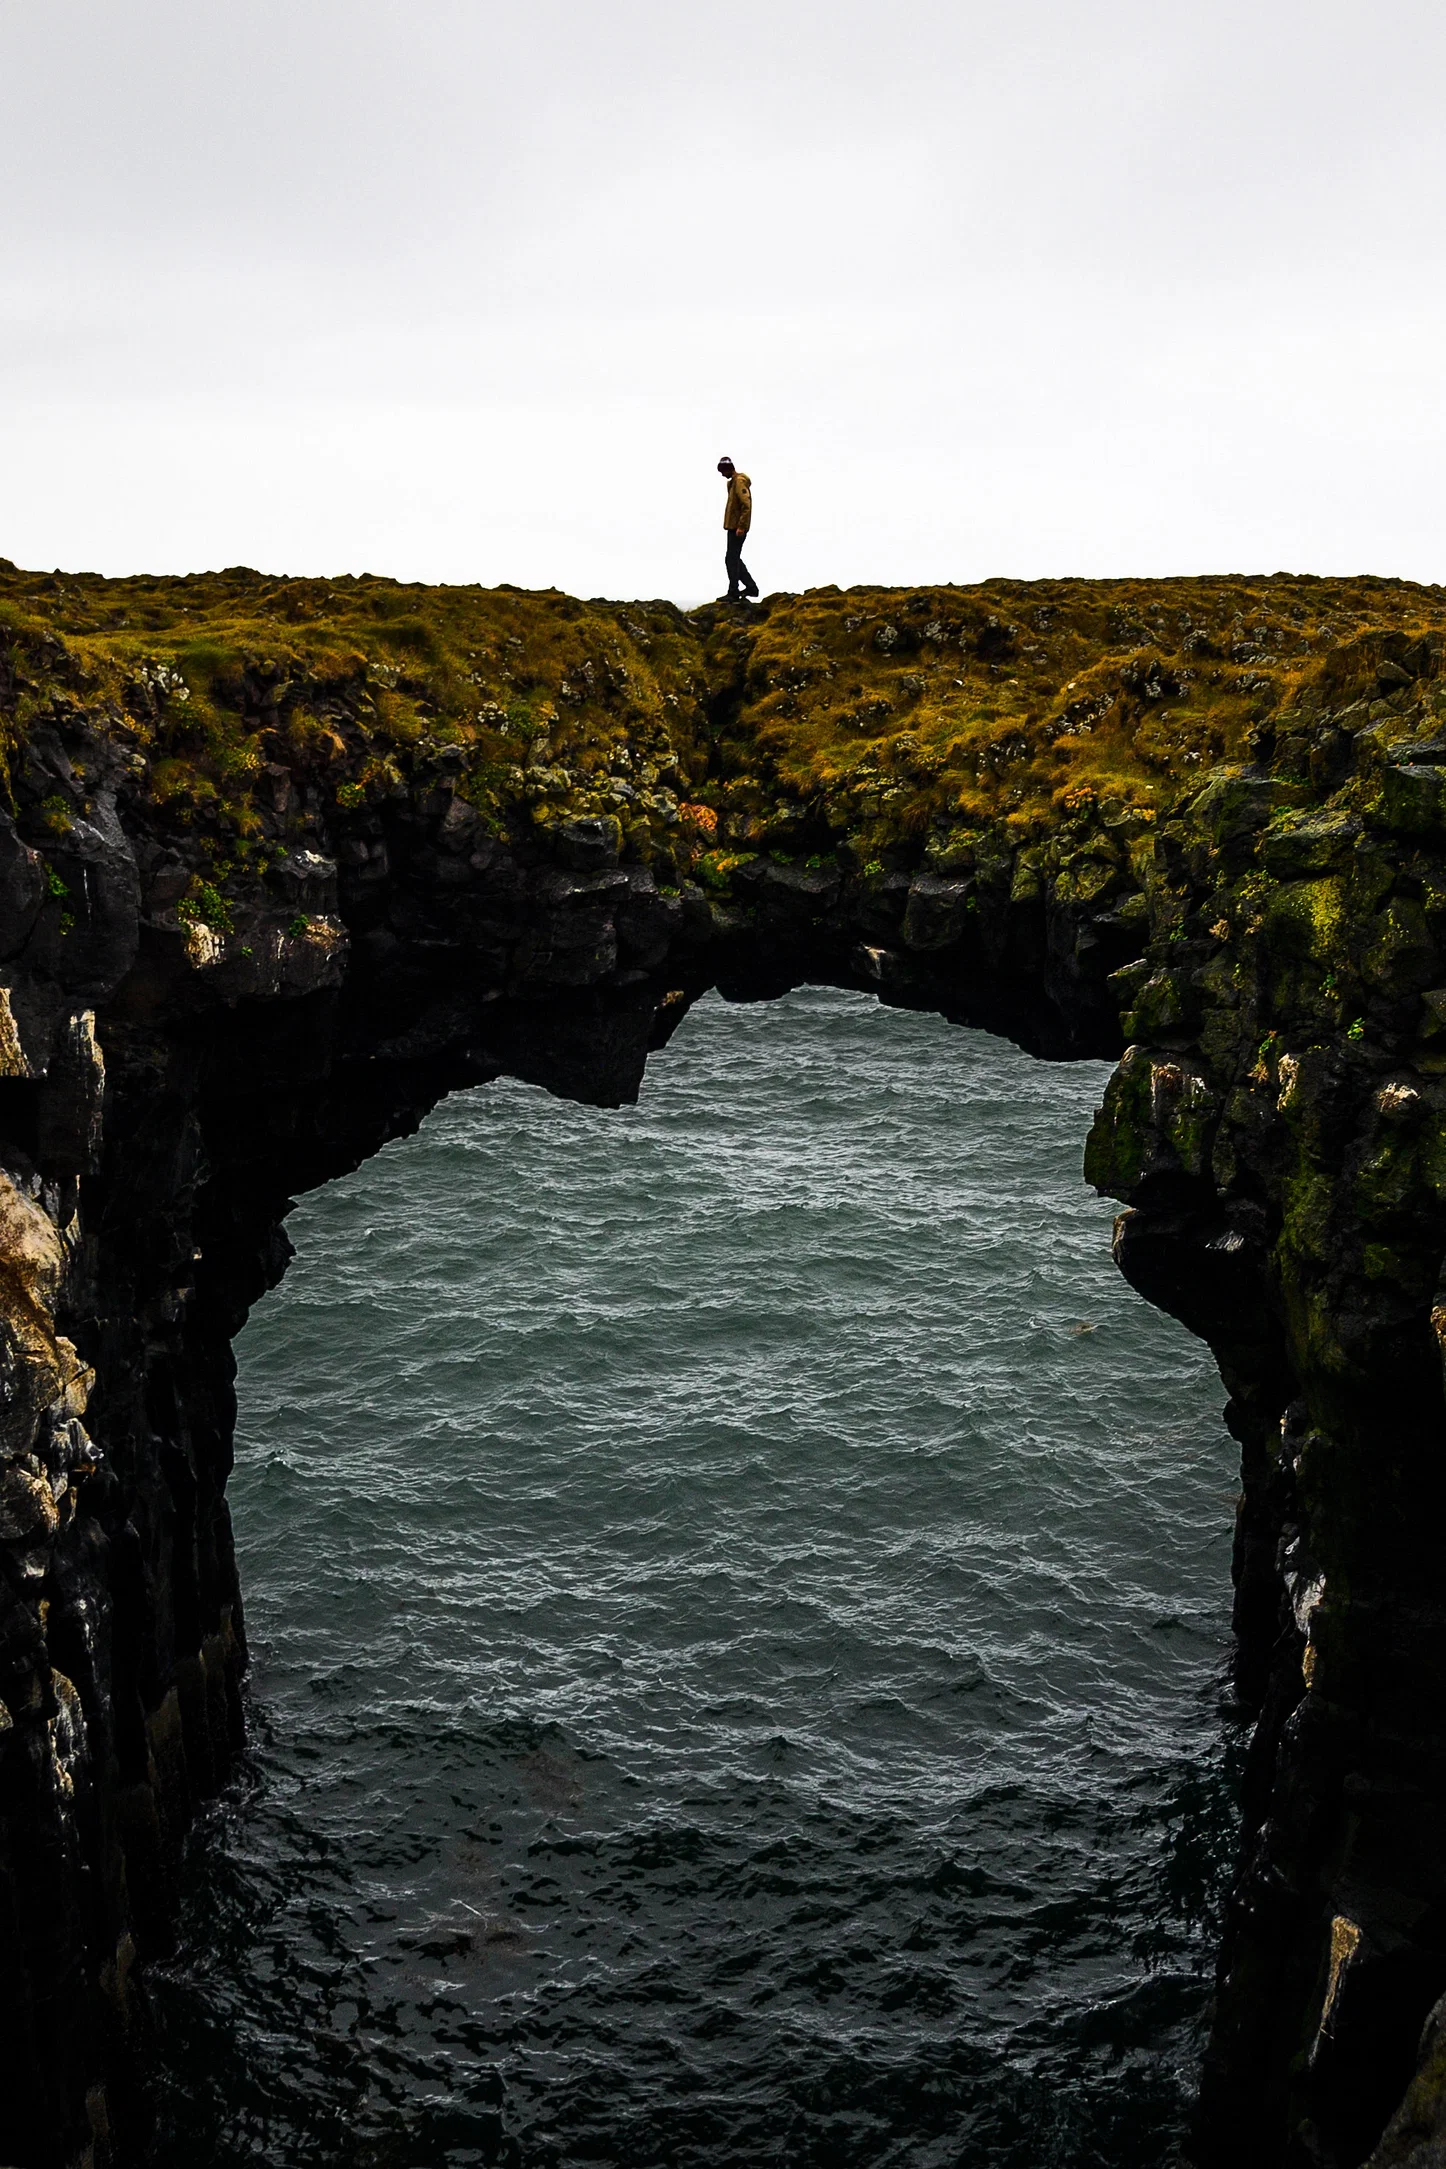 Traveller walking over a rock formation that suspends over the ocean